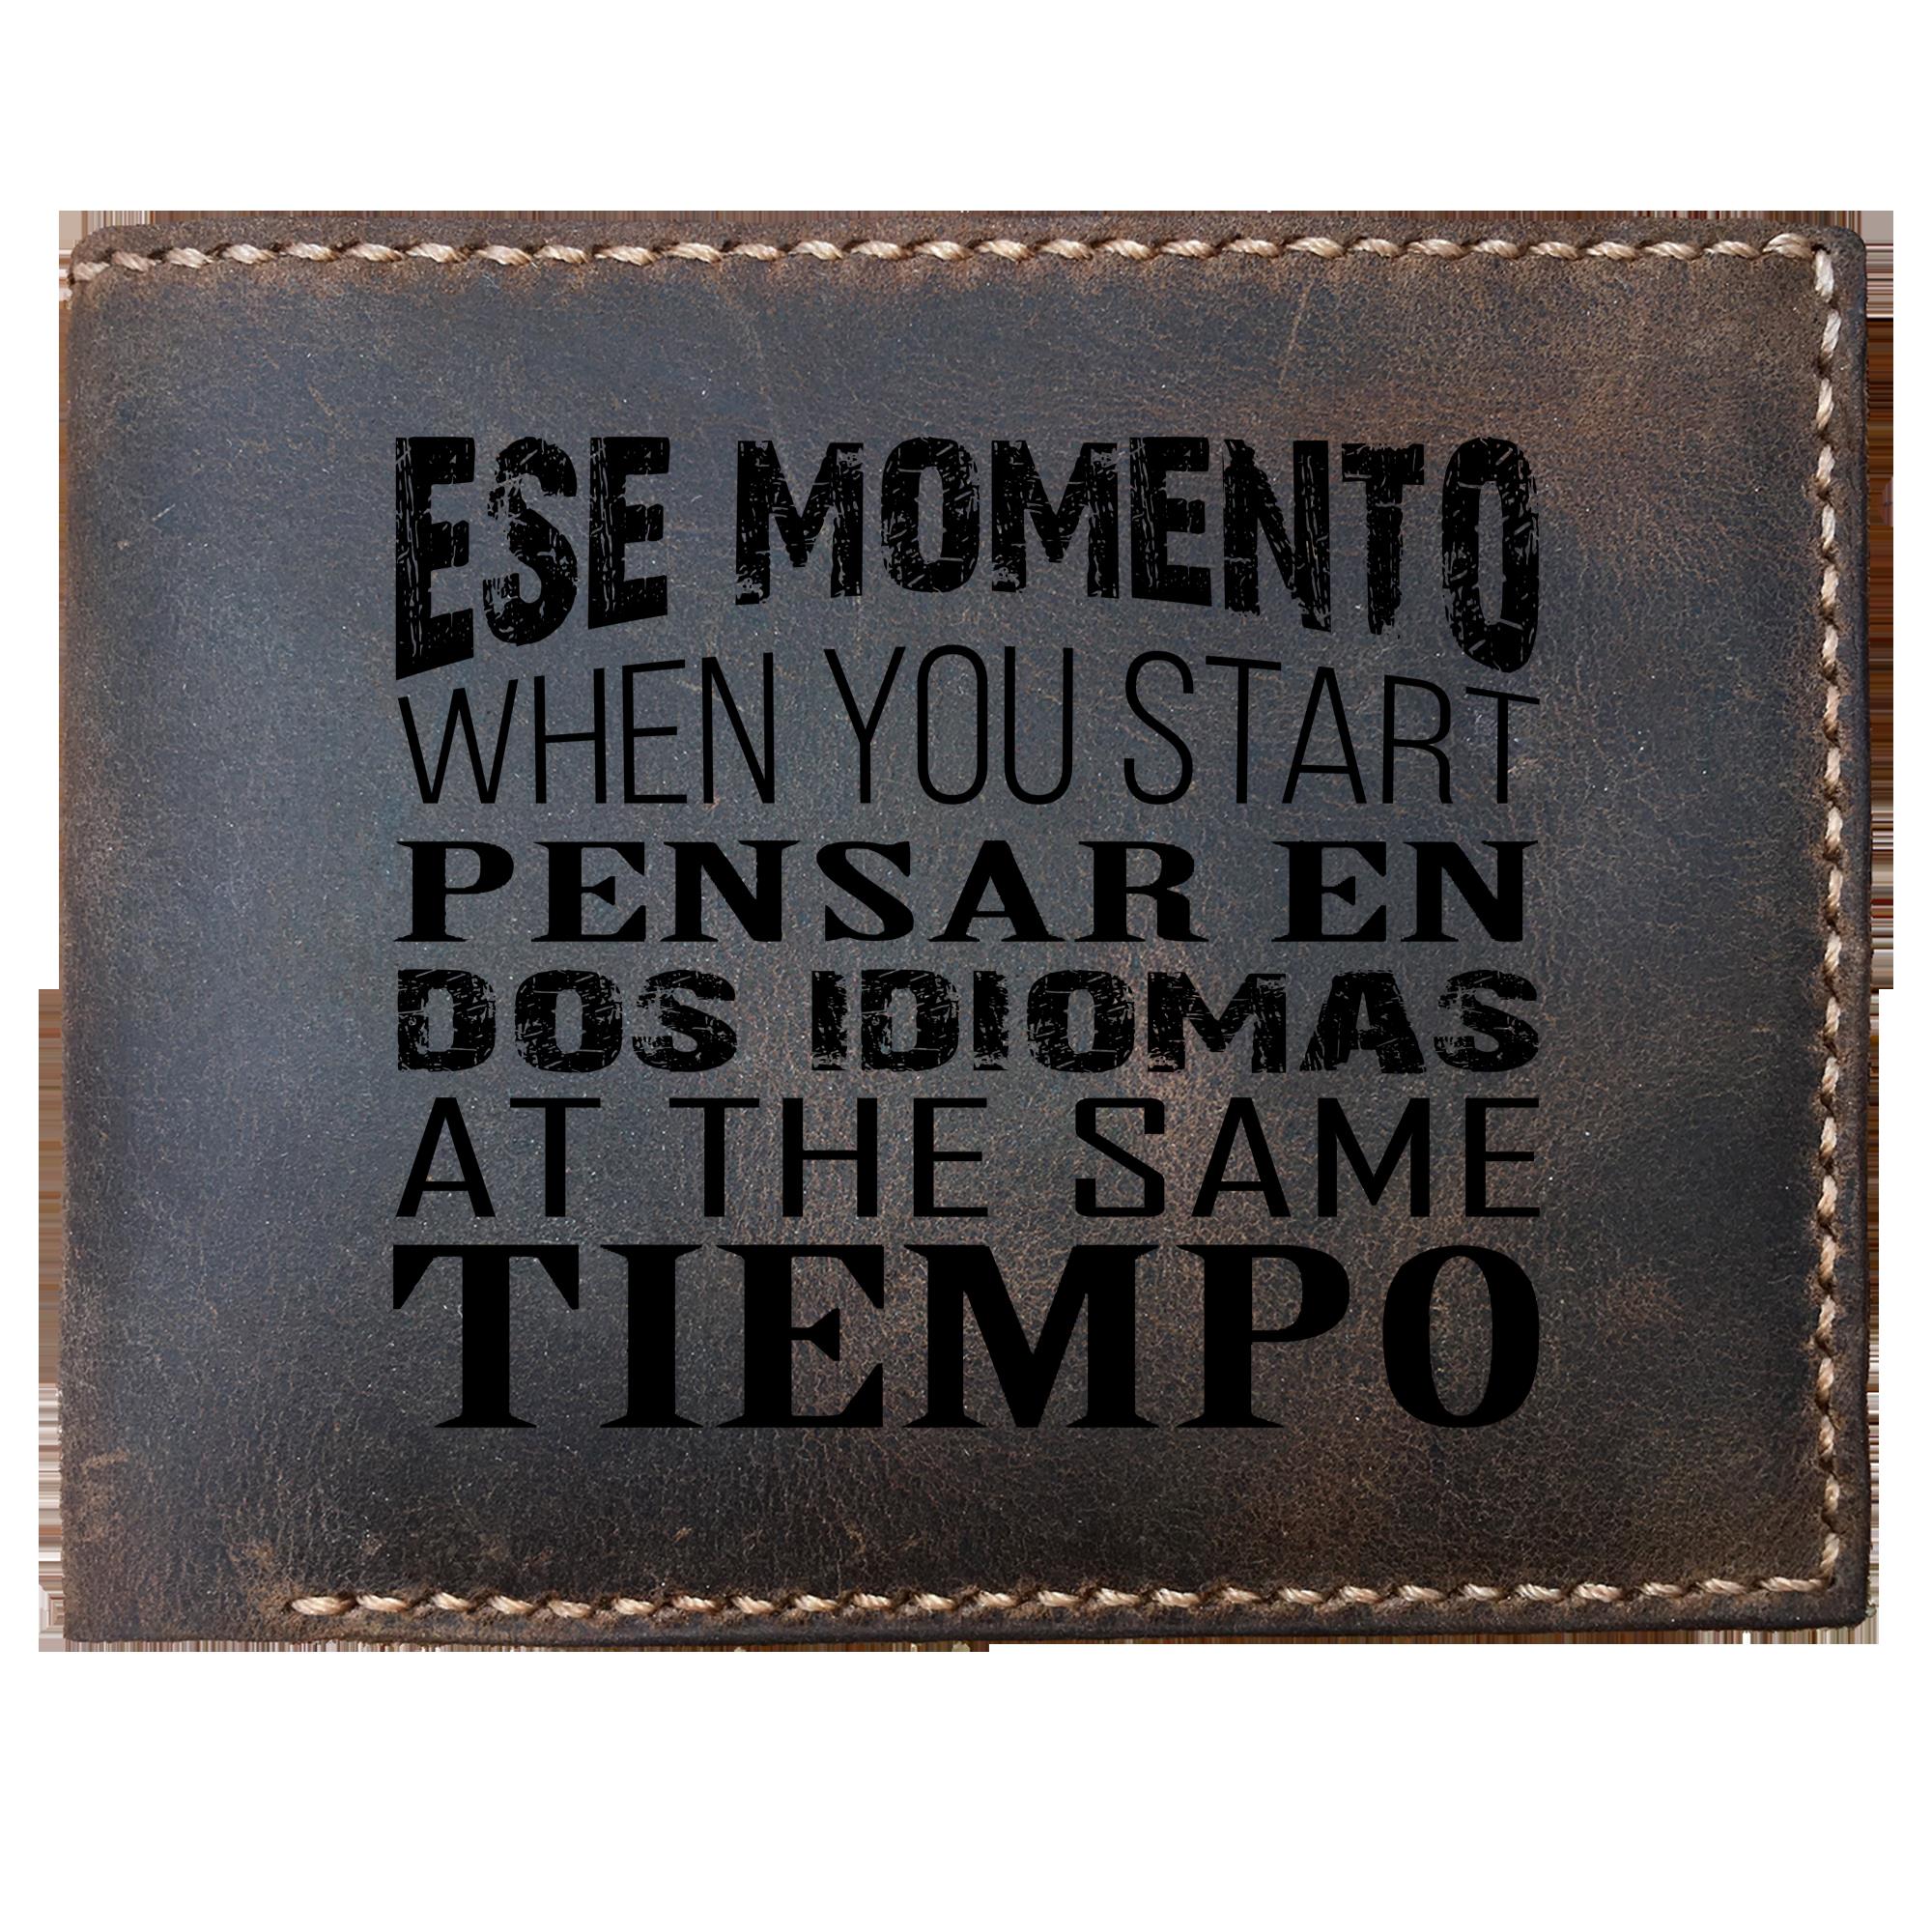 Skitongifts Funny Custom Laser Engraved Bifold Leather Wallet For Men, That Moment When You Speak English Spanish At The Same Time